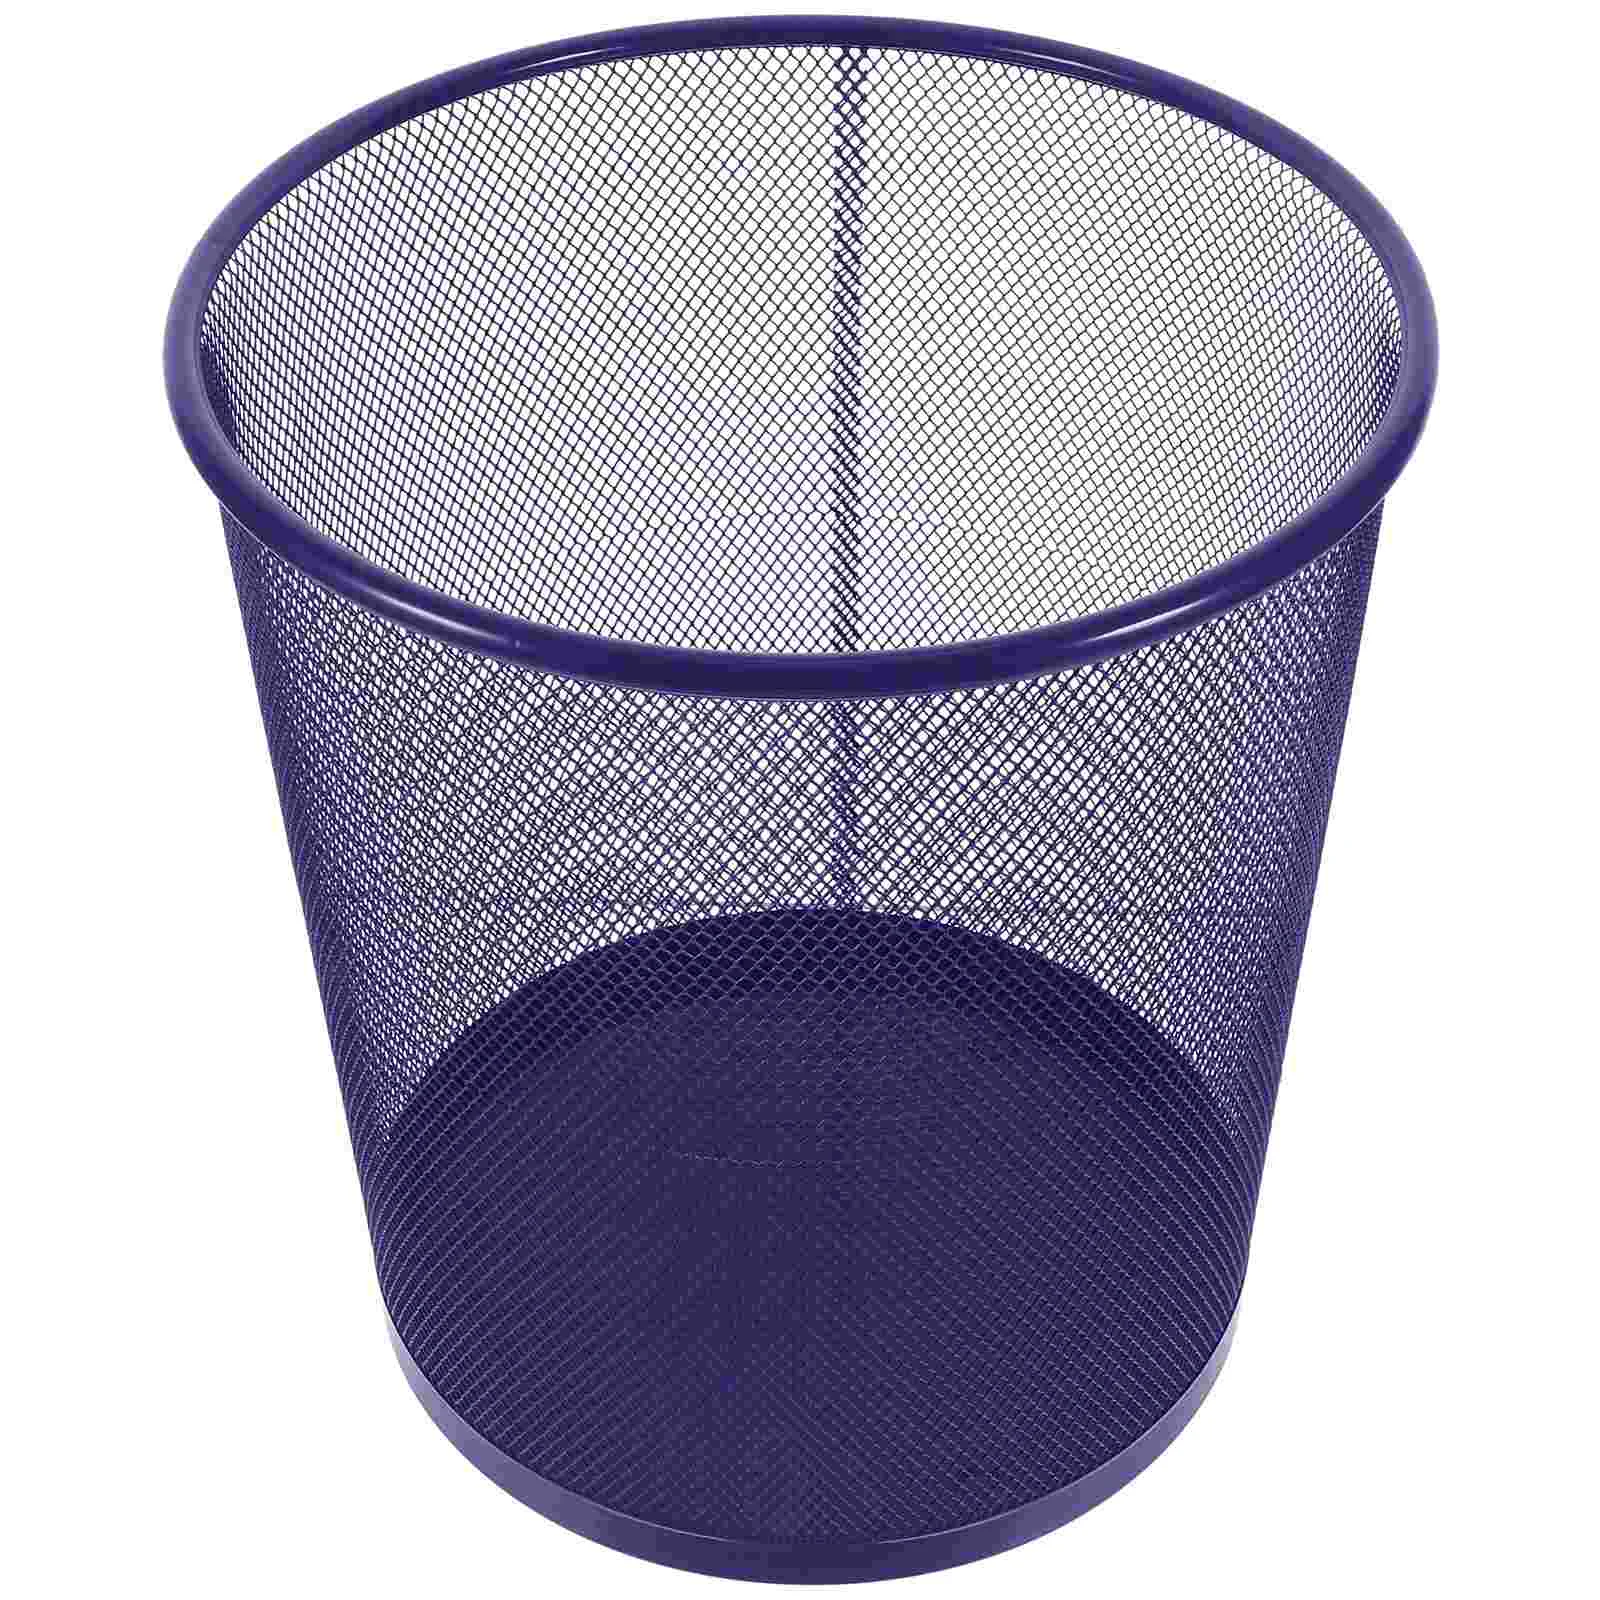 

Mesh Trash Cans Office Metal Wire Wastebaskets Recycling Garbage Container Bin Round Rubbish Waste Paper Bin Office Home Bedroom